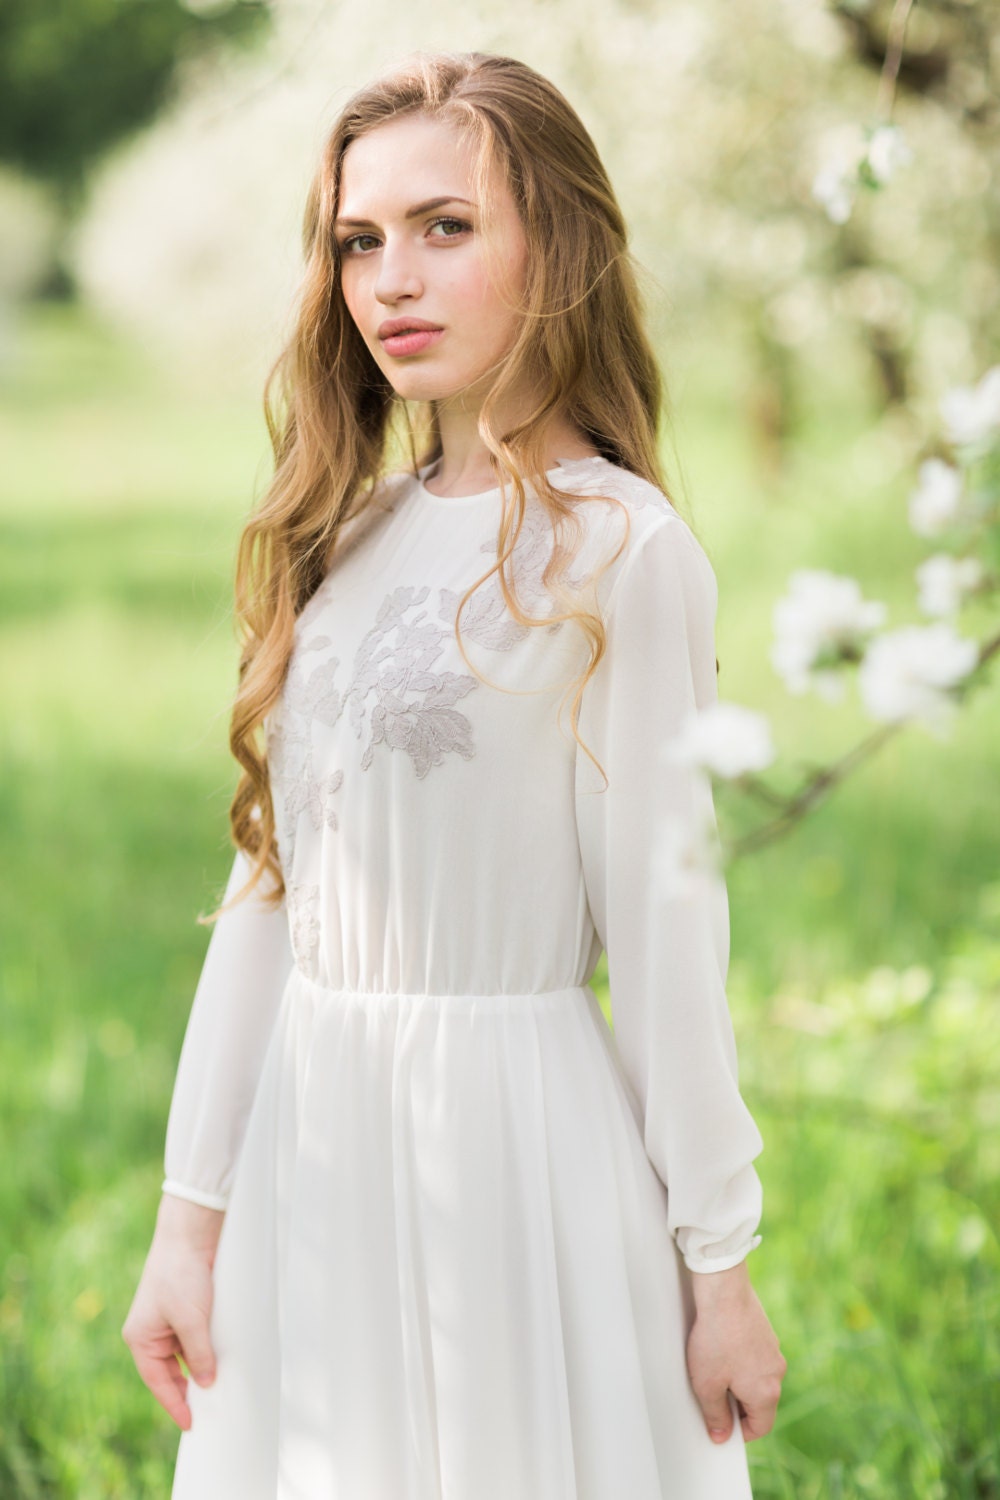 High-necked milk dress with lavender lace decoration